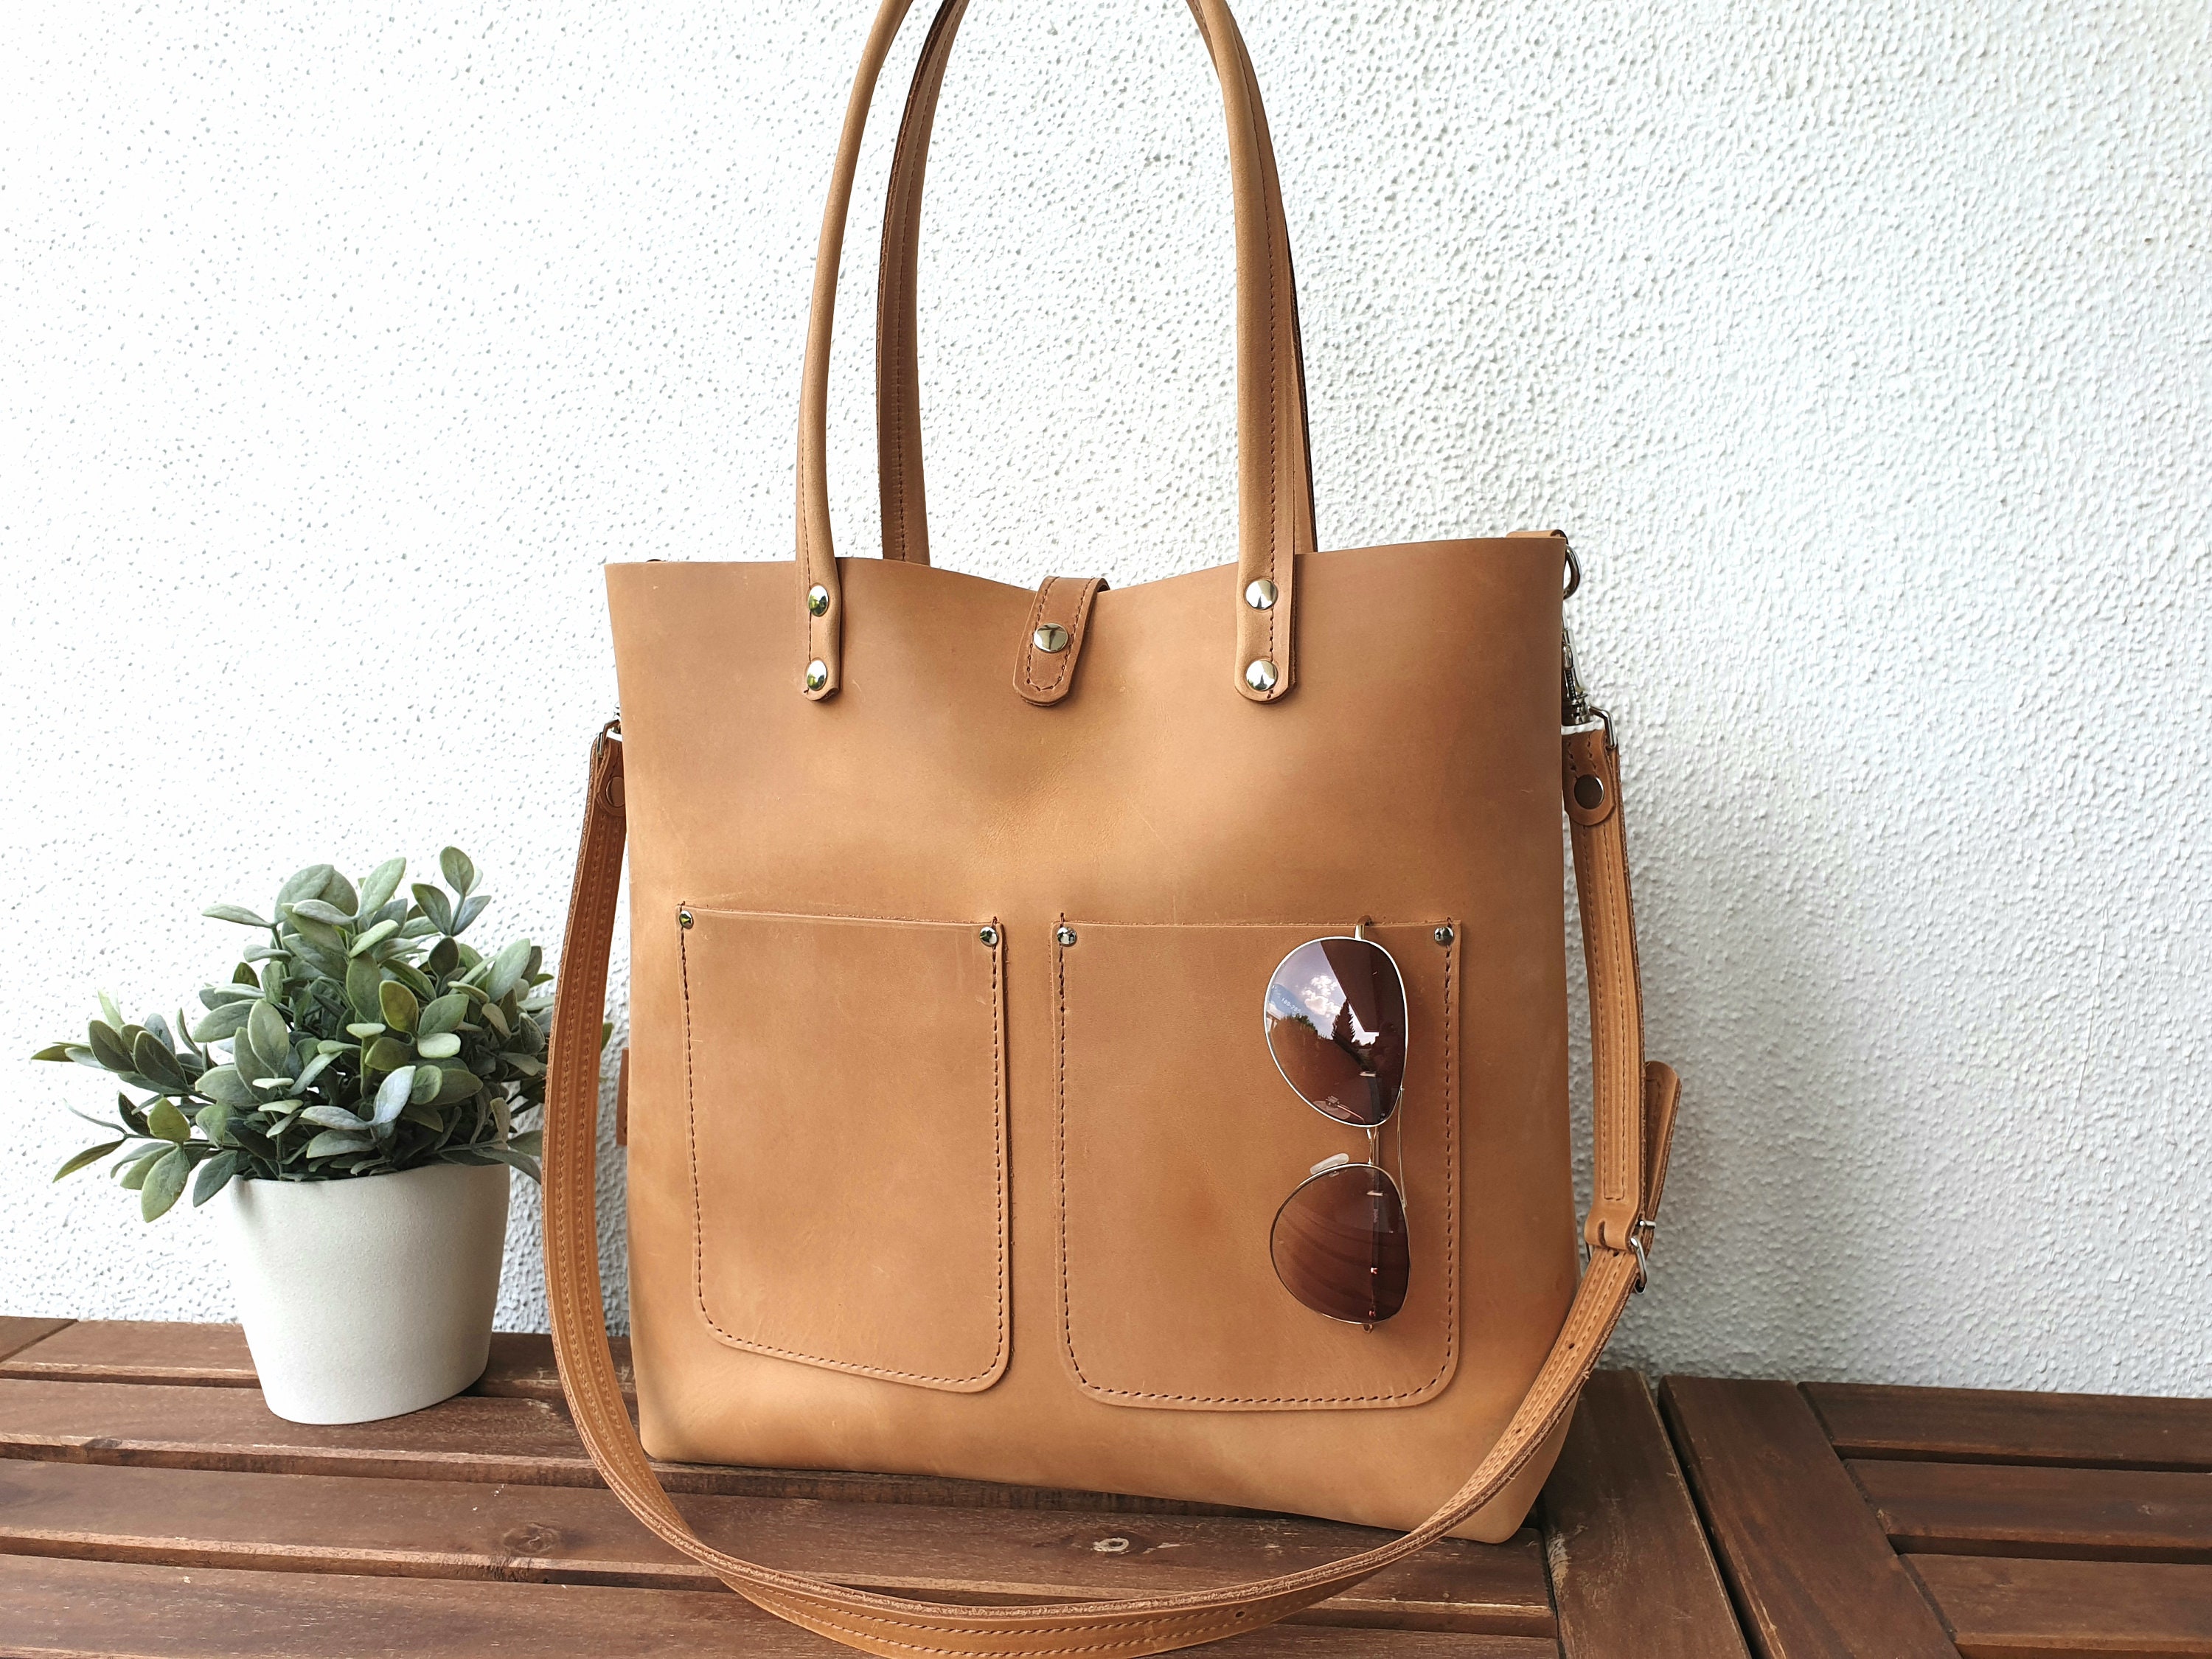 Large Leather Shoulder Bag Women, Tan Color, With Crossbody Strap, Large  Shopping Bag, Sturdy Natural Leather, Lifetime Quality, Tan Color - Etsy